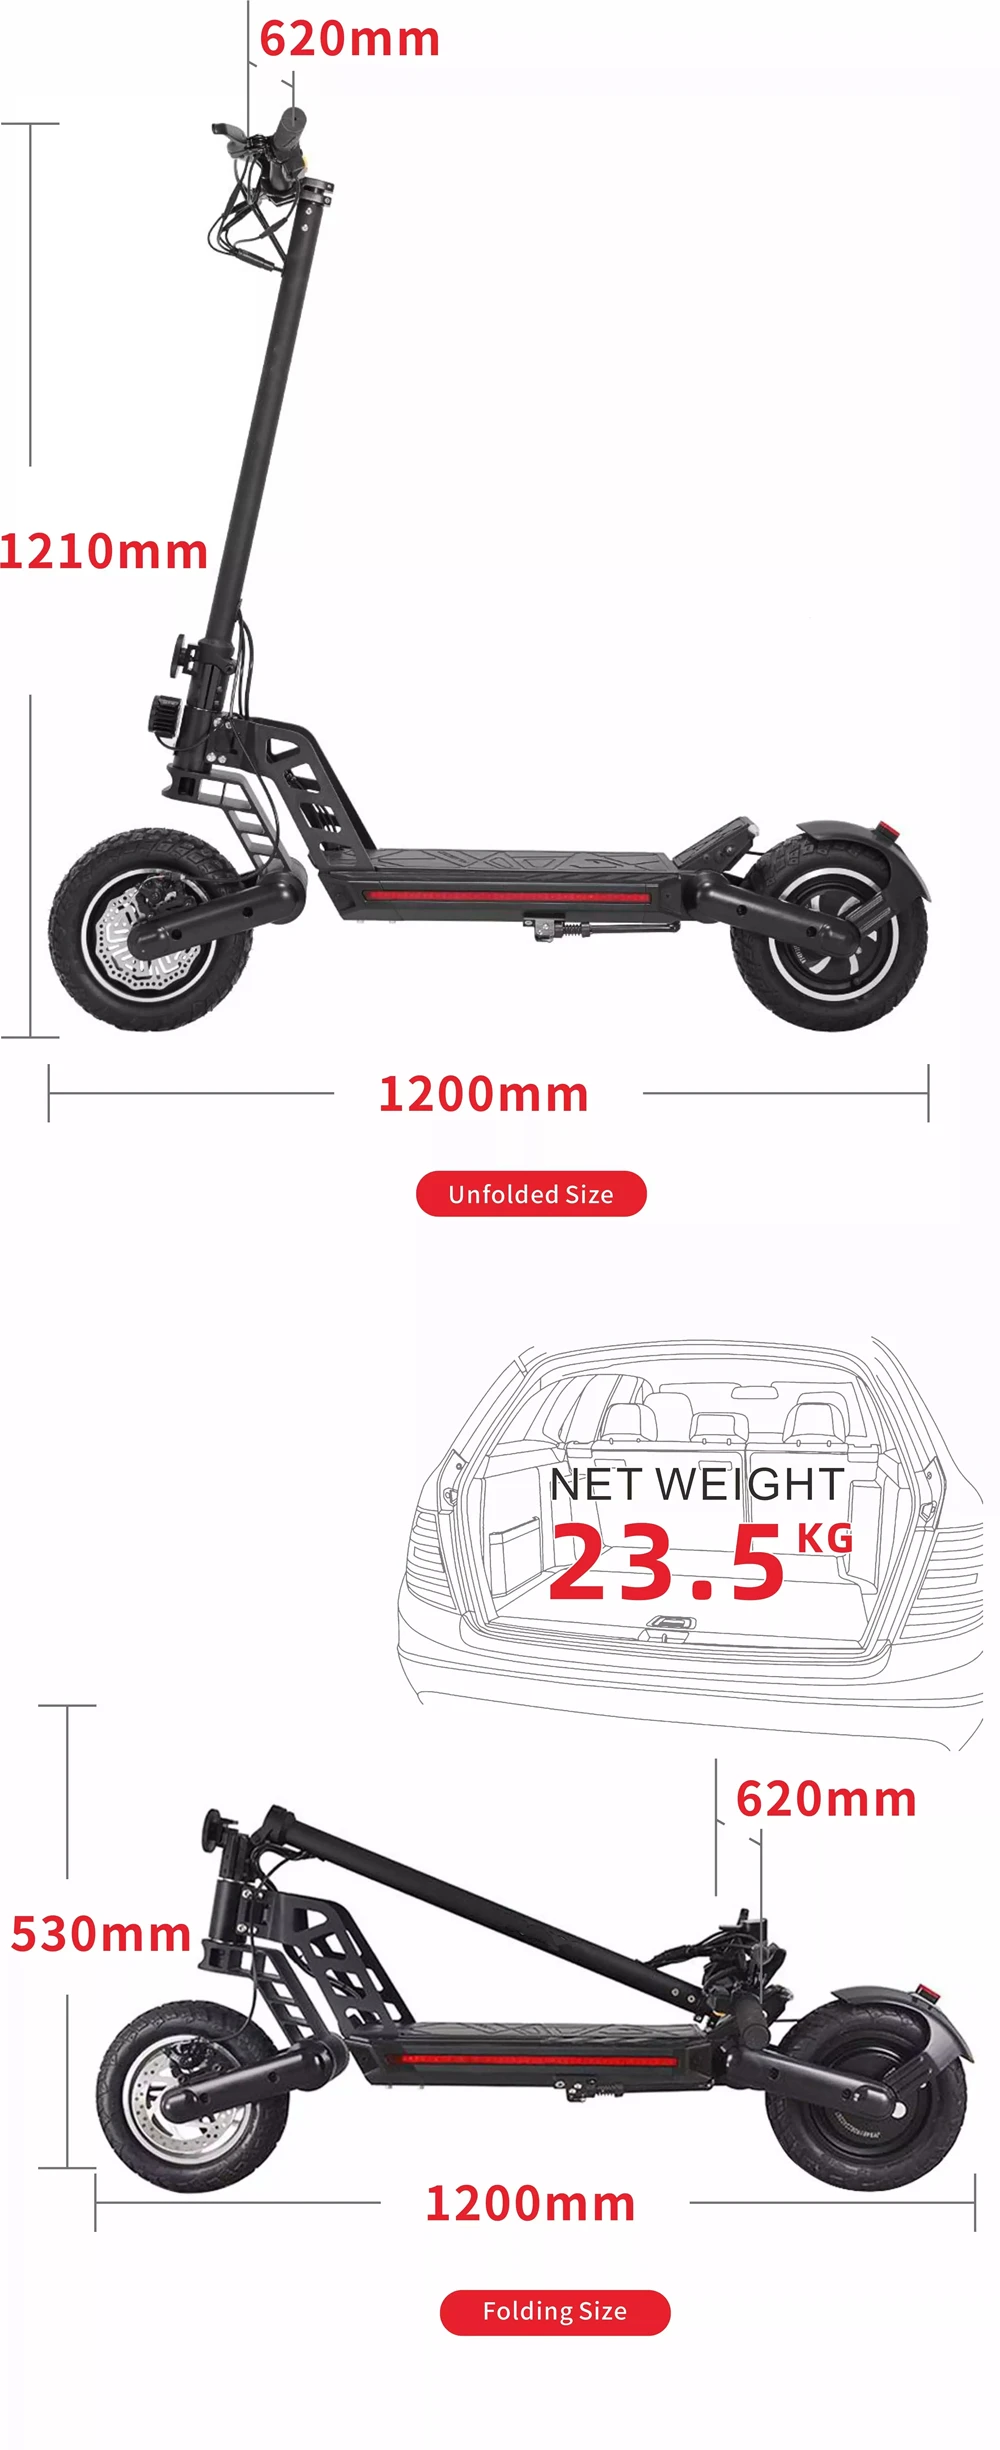 EU Warehouse Stock Quickwheel Self-Balancing Electric Scooters X2 48V 1000W Drop Shipping 2 Wheel Electric Scooter For Adults